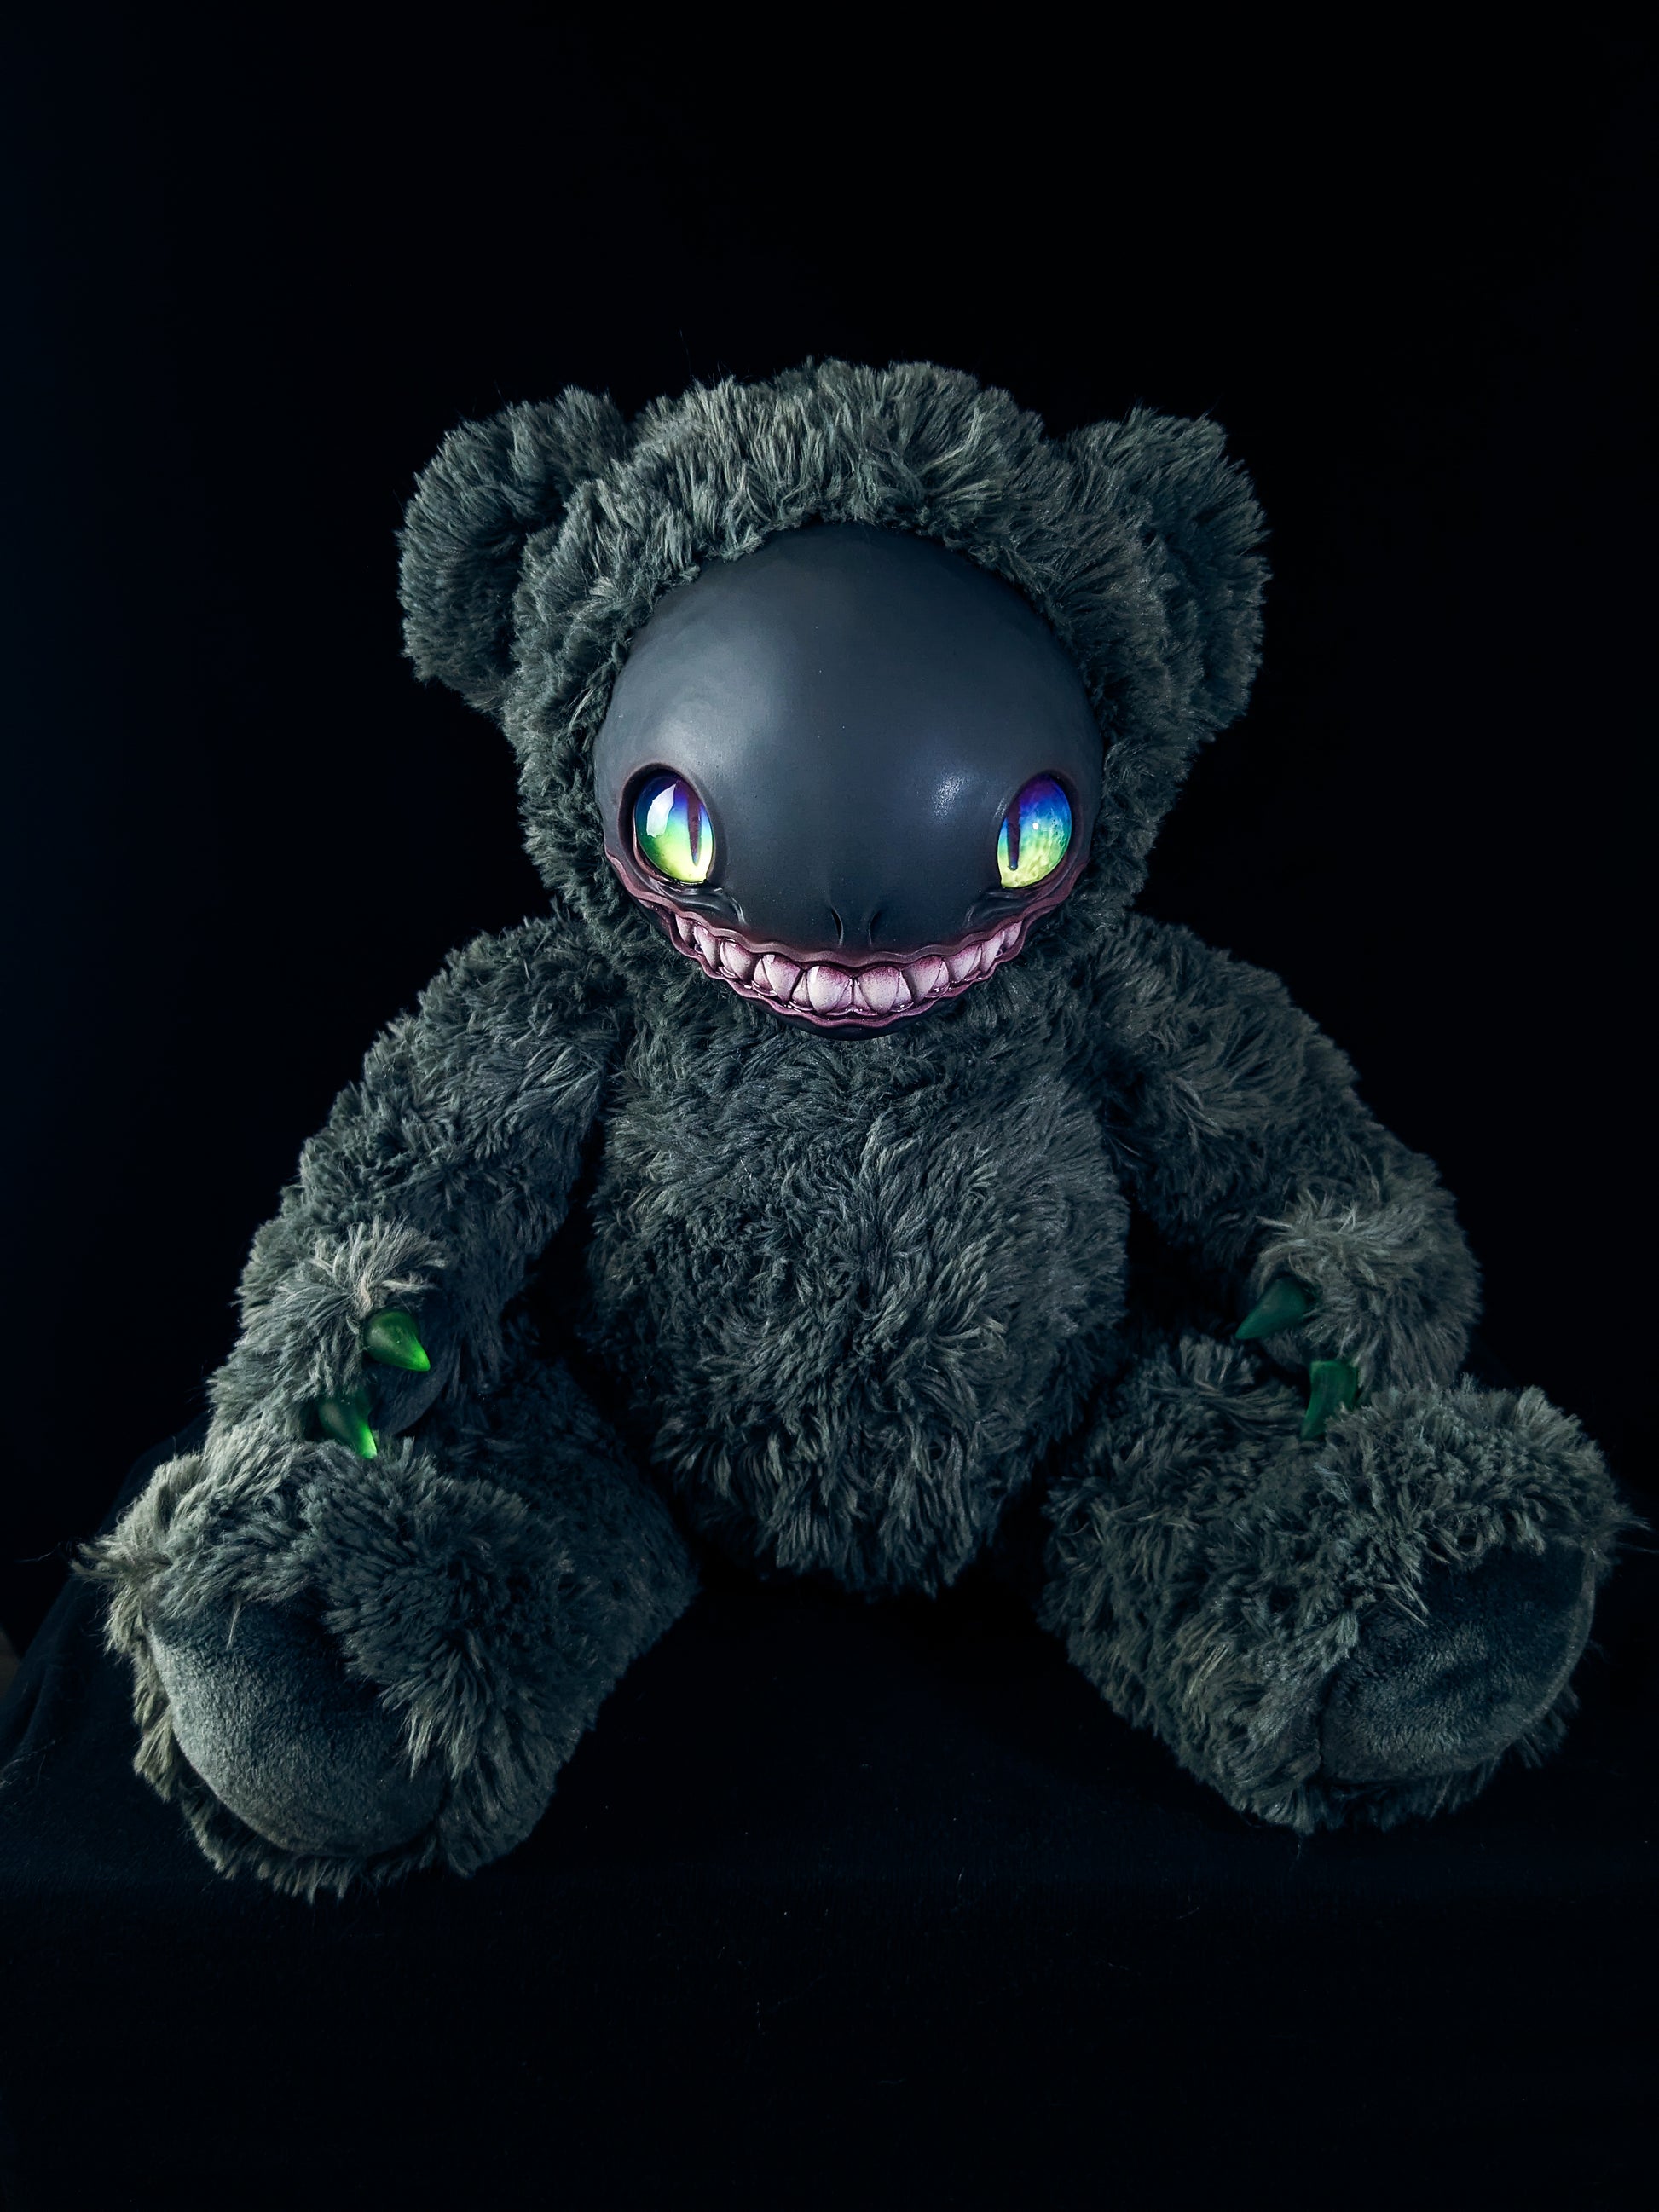 Krazy Klaw: FRIEND - CRYPTCRITZ Handcrafted Alien Art Doll Plush Toy for Cosmic Dreamers